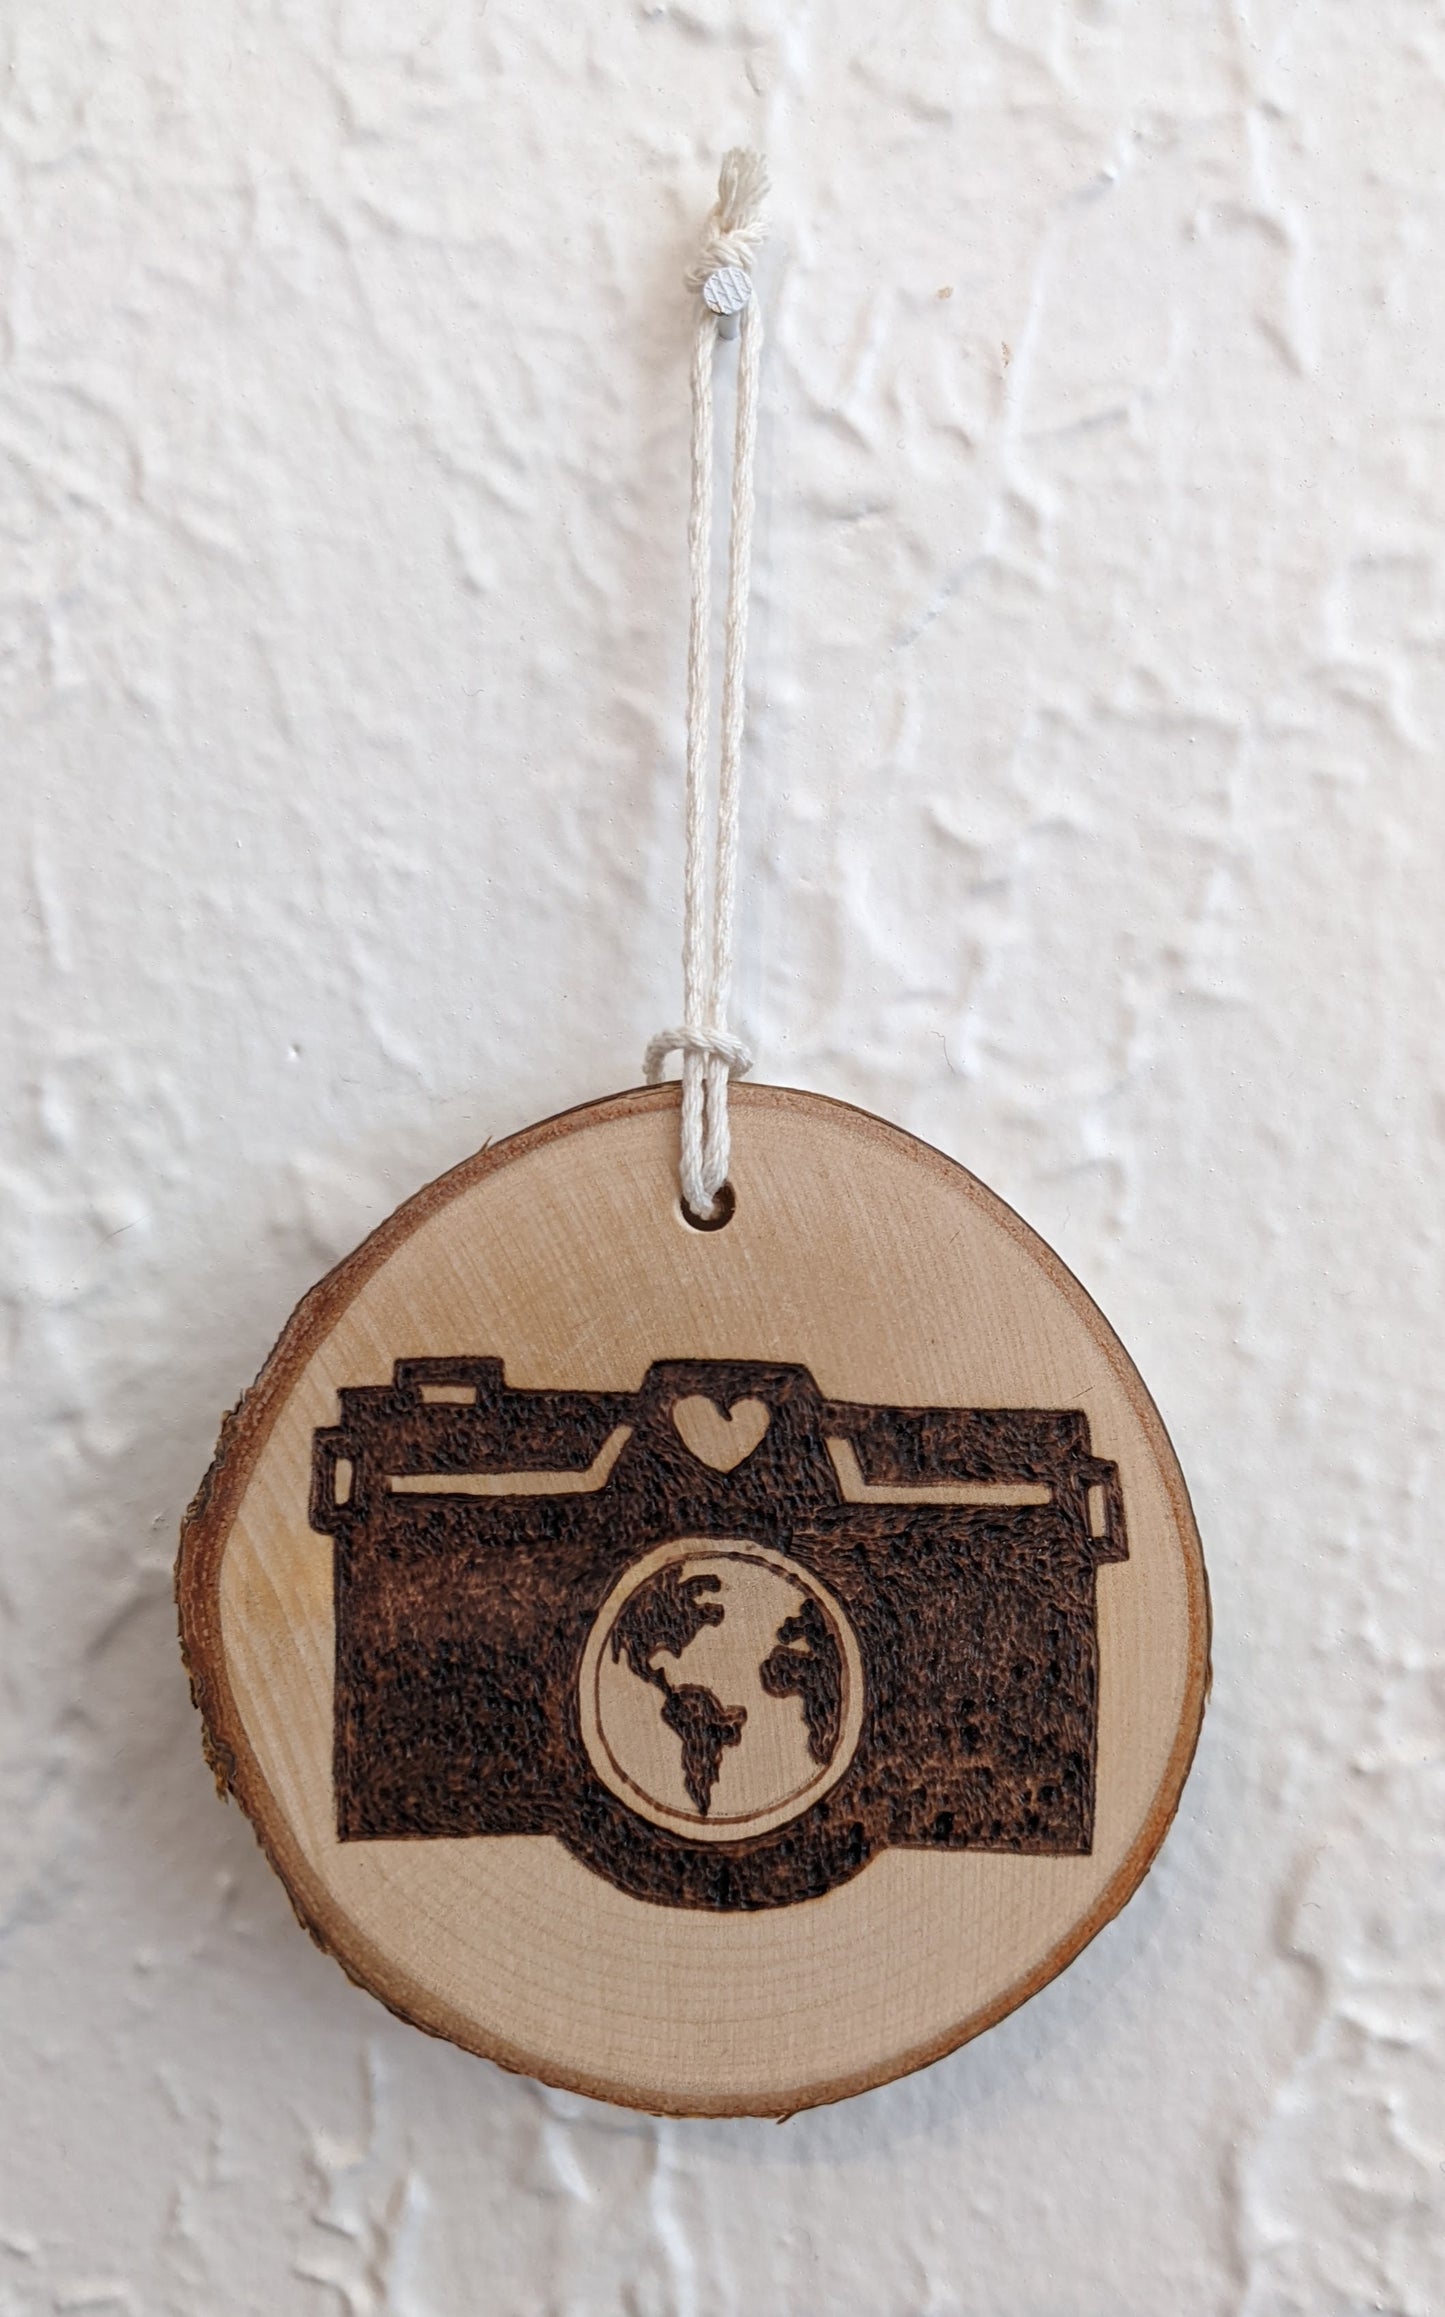 Wood burned Art by Wood Wanderlust ornament with world view camera